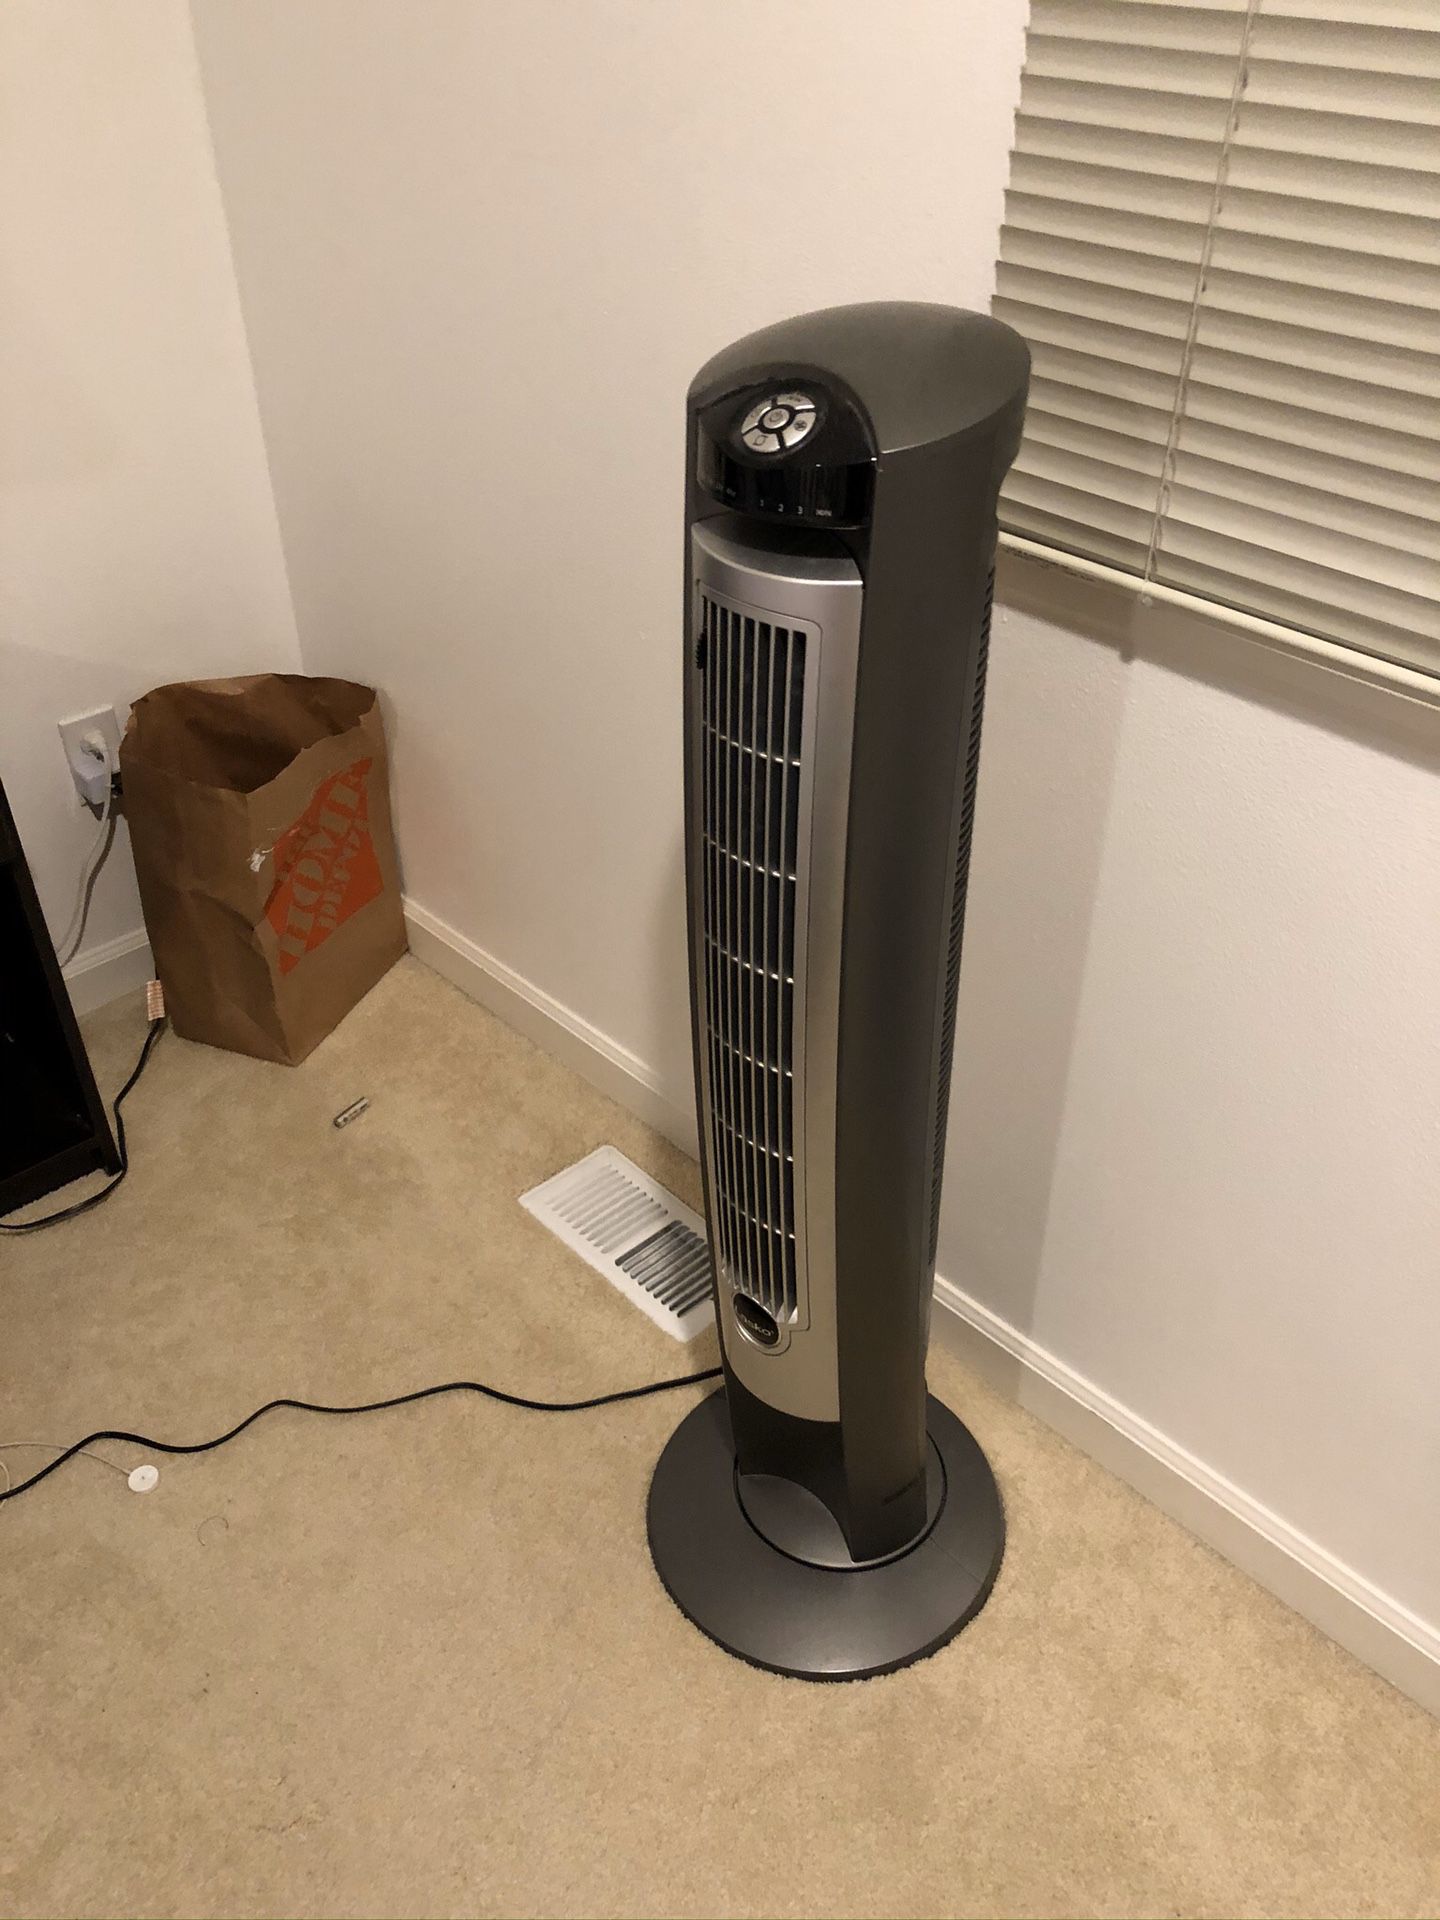 Lasko T42951 Wind Curve Portable Electric Oscillating Stand Up Tower Fan with Remote Control for Indoor, Bedroom and Home Office Use, 13x13x42.5, Sil